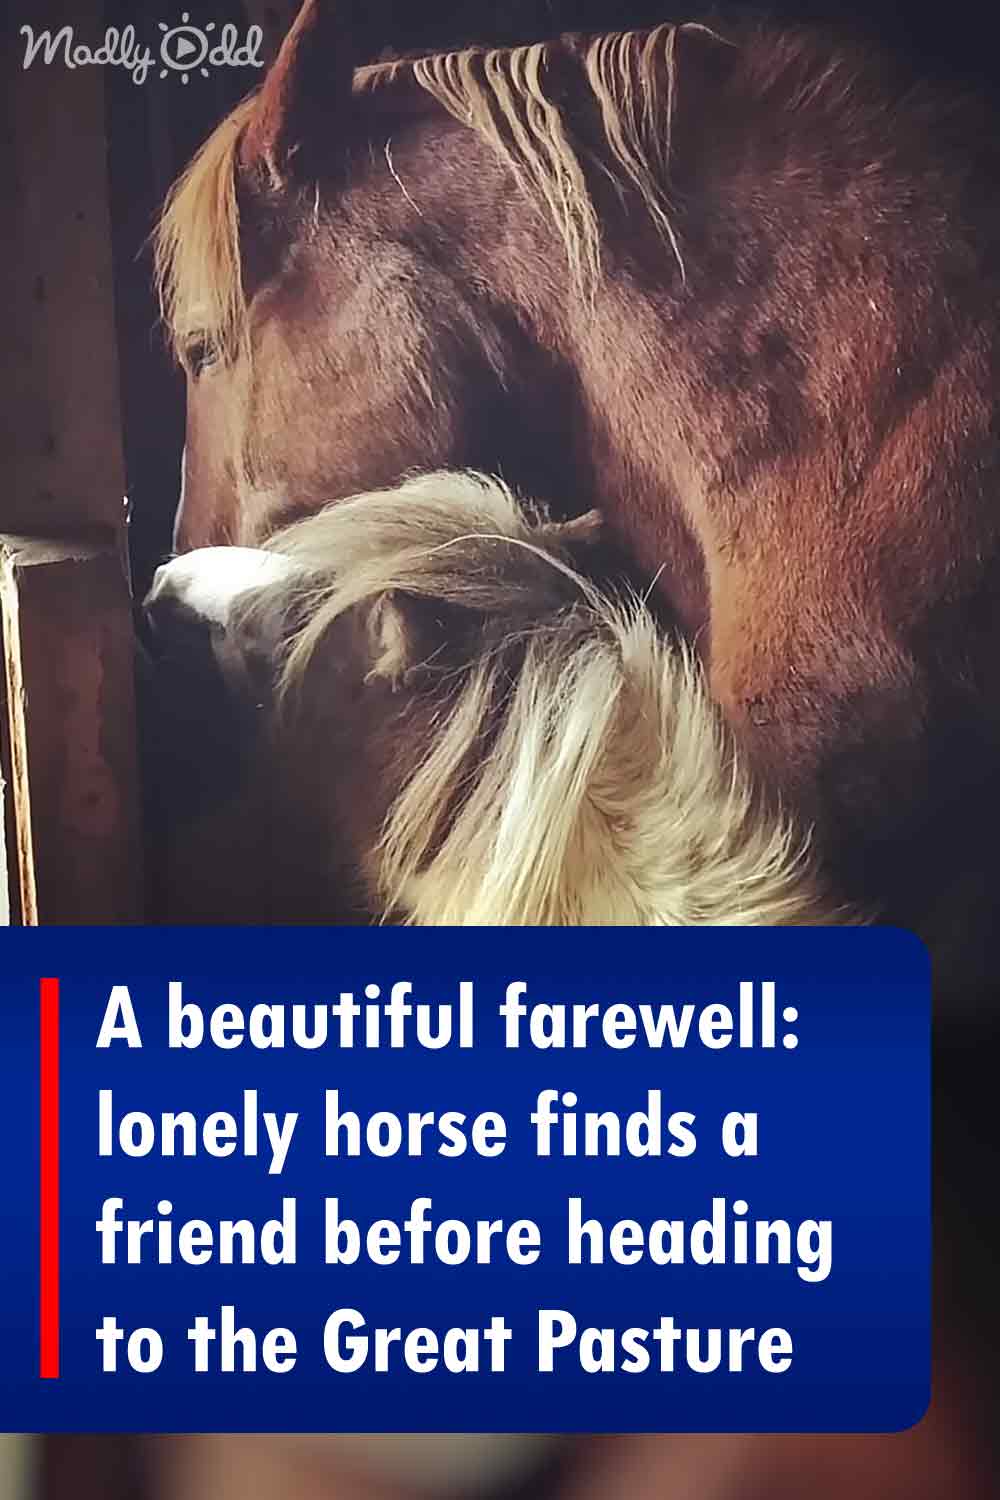 A beautiful farewell: lonely horse finds a friend before heading to the Great Pasture